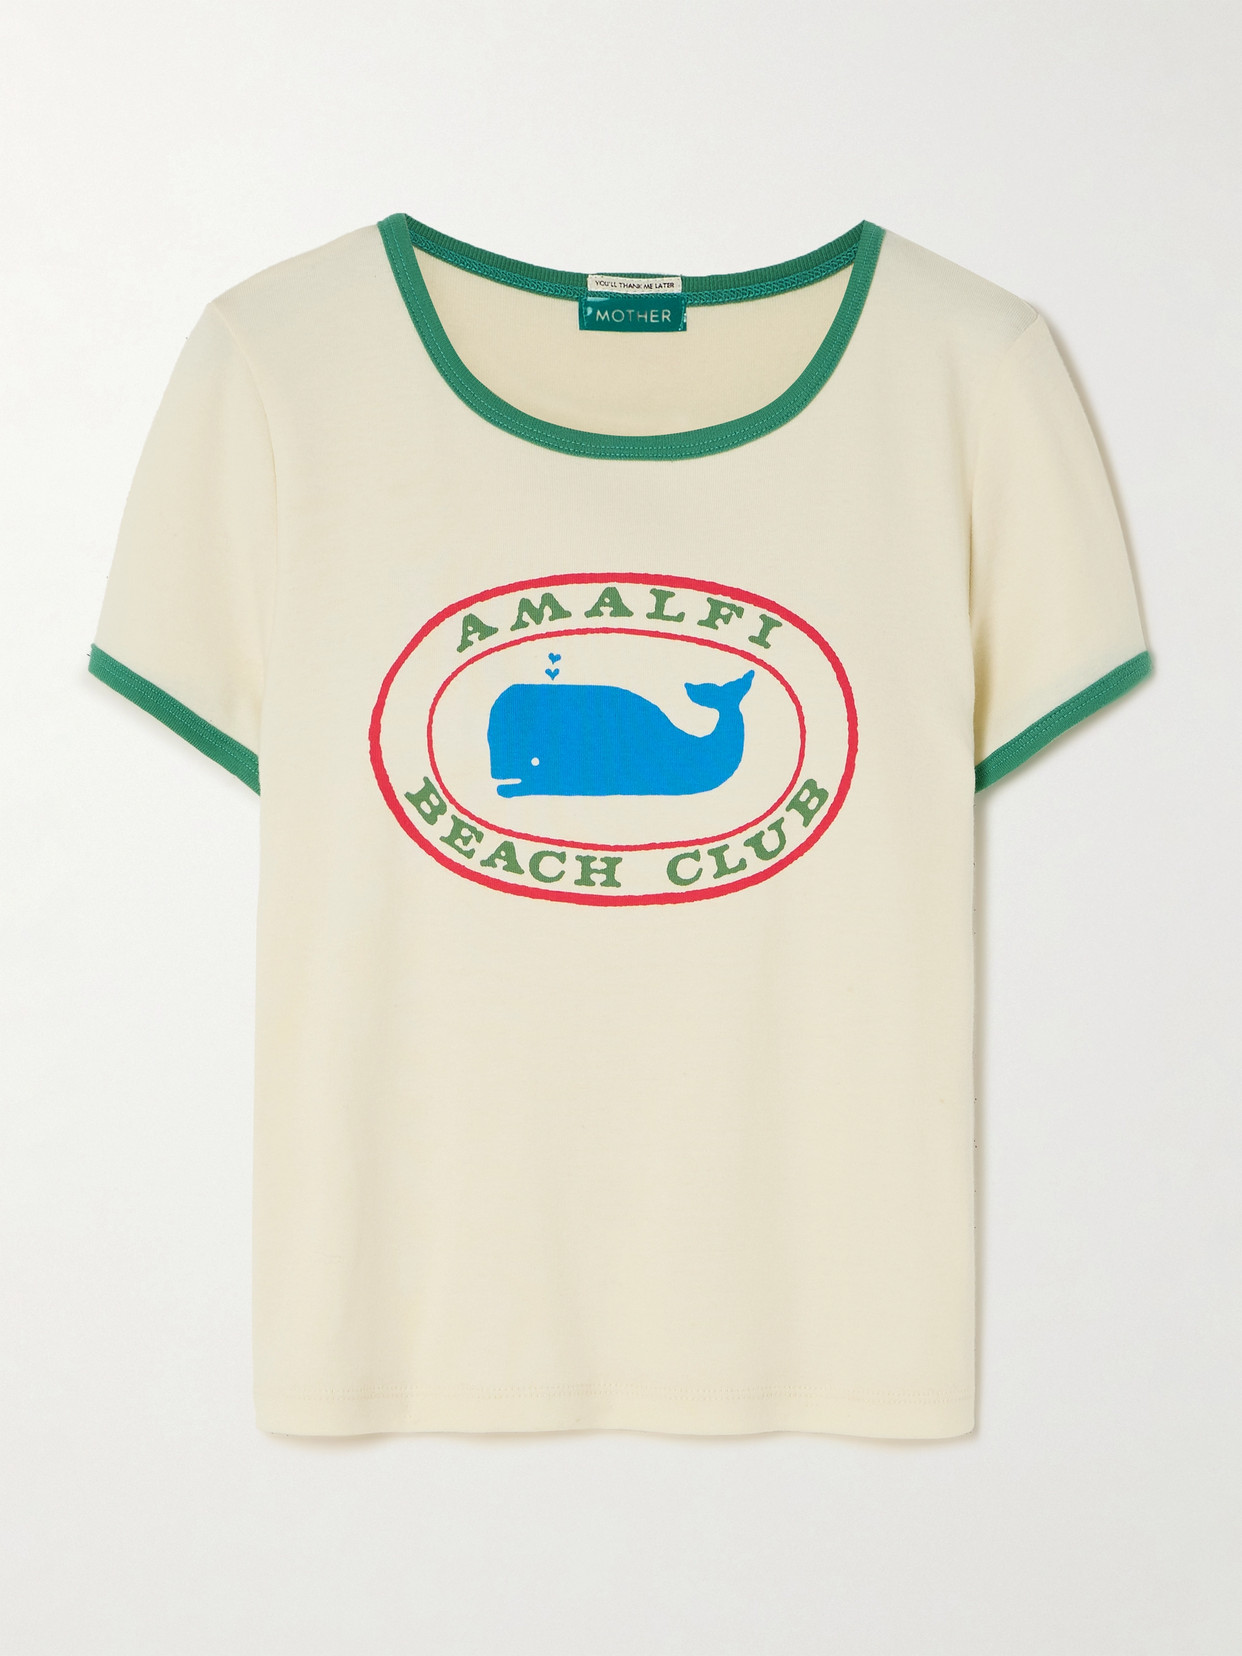 The Itty Bitty Printed Cotton-Jersey T-Shirt